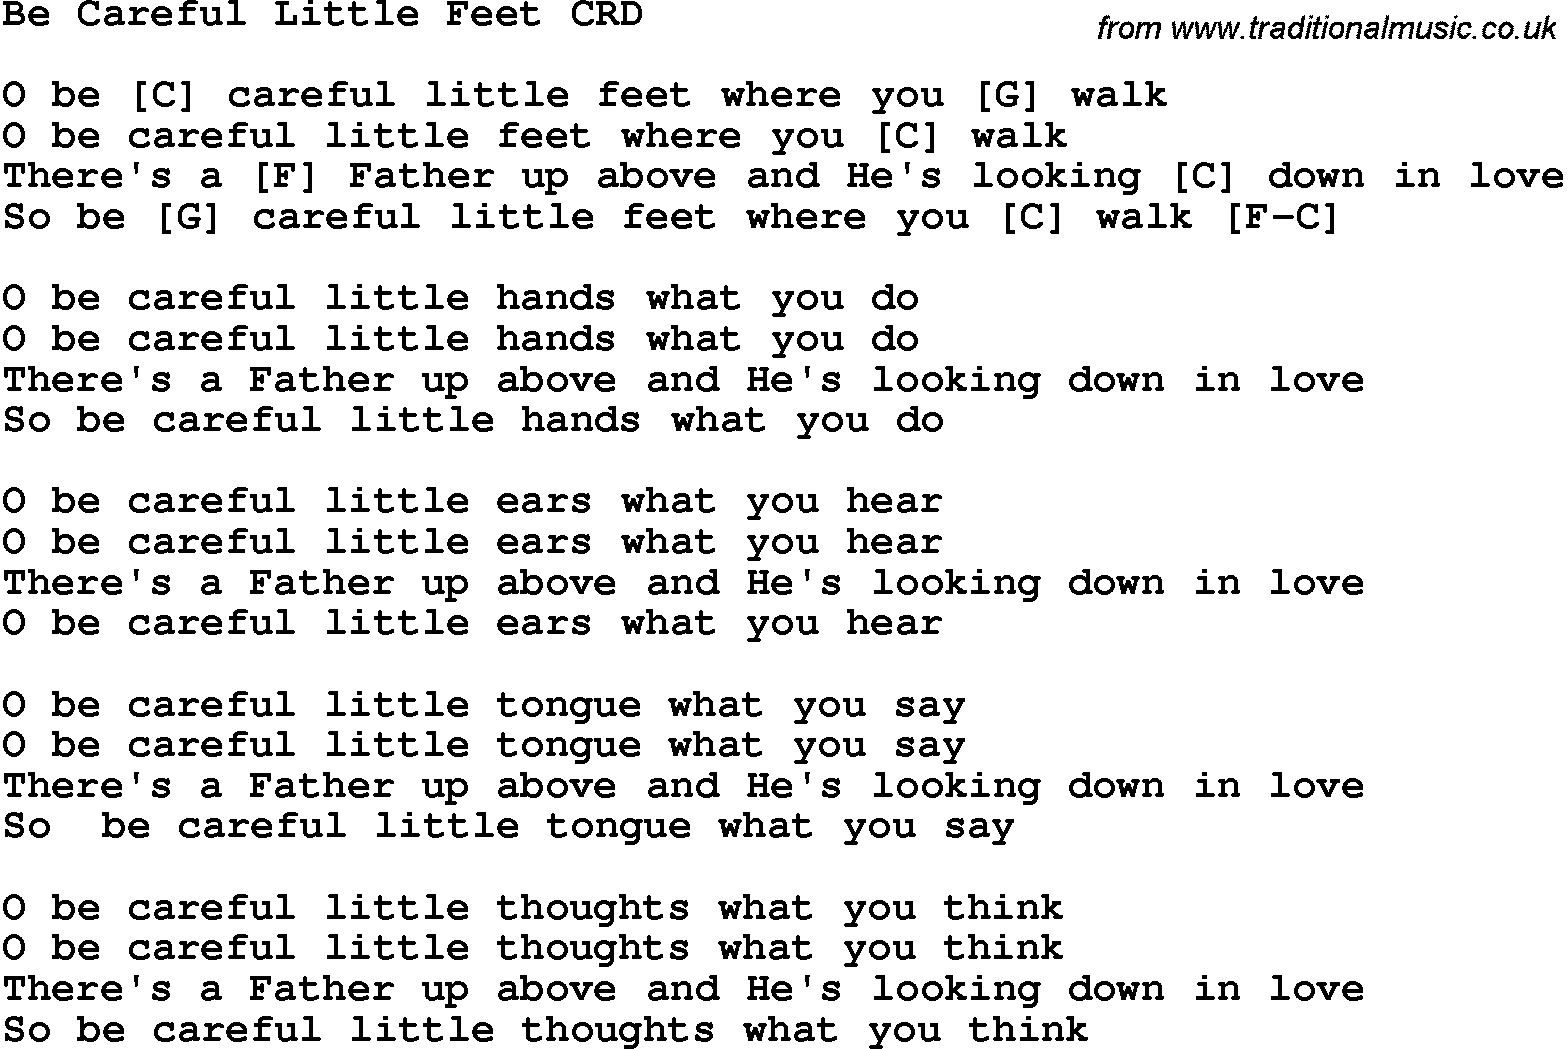 Christian Childrens Song Be Careful Little Feet Lyrics And Chords It made me sensitive to my choices. traditional music library